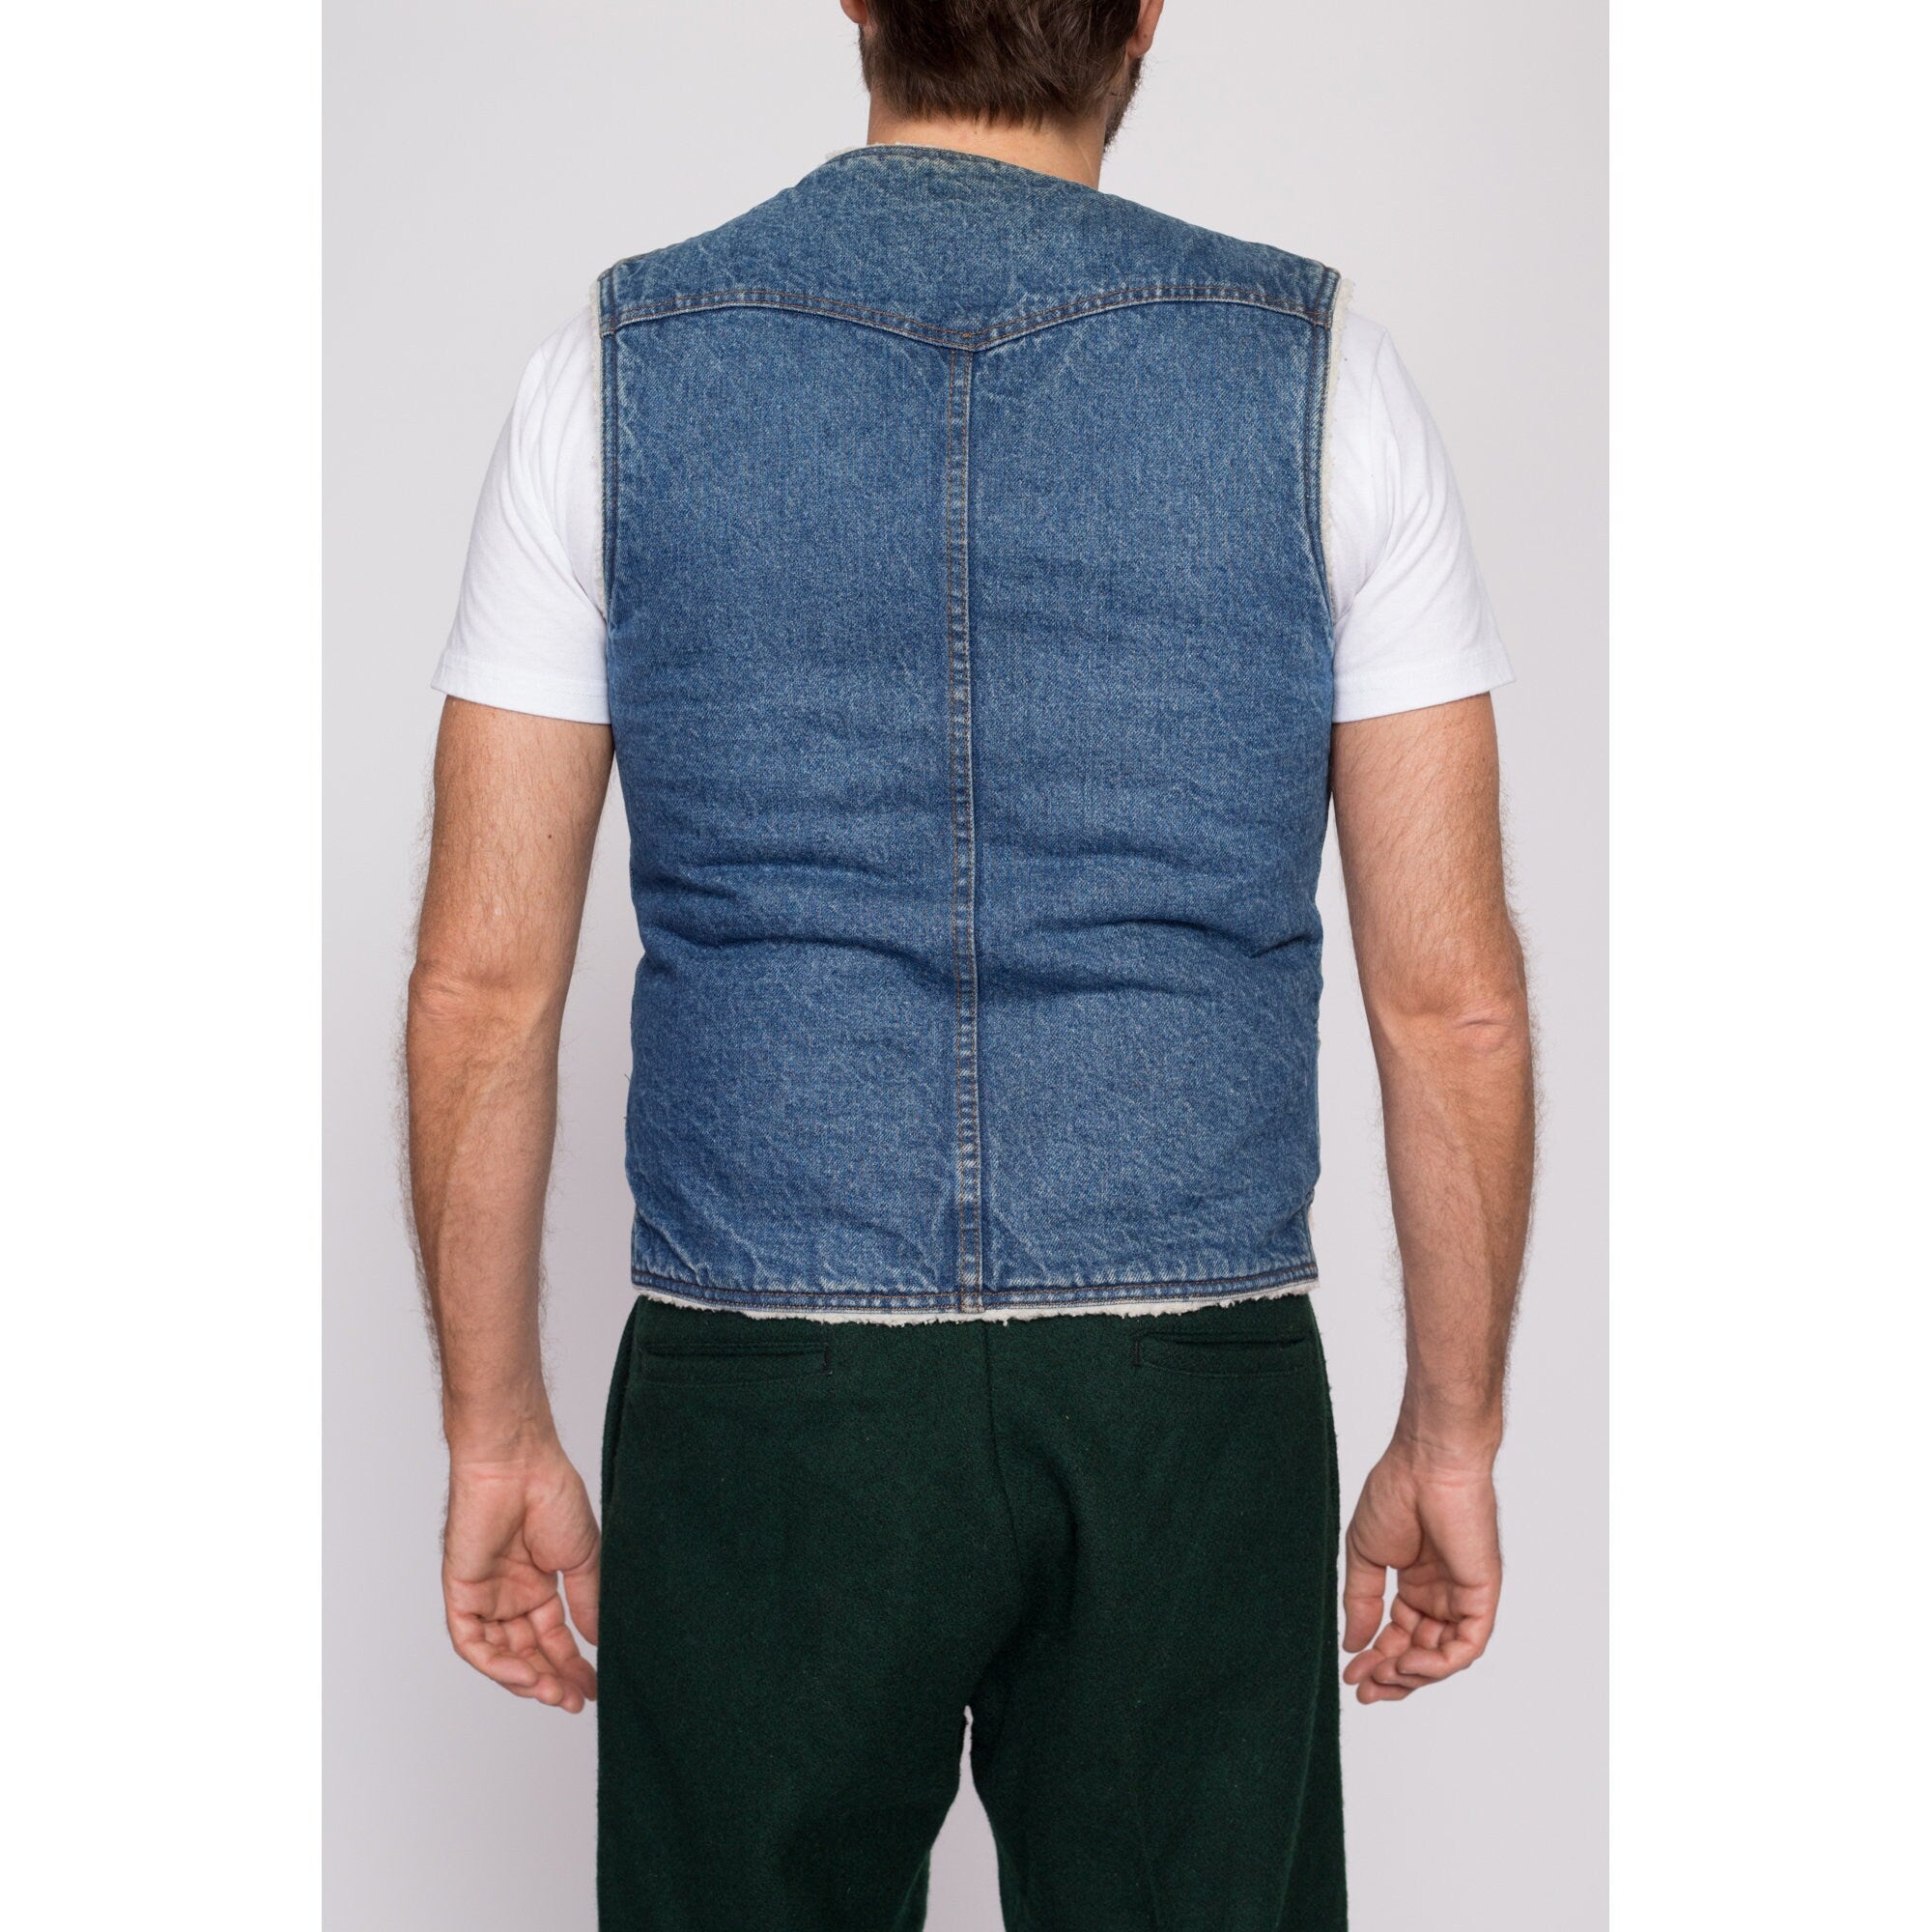 LEVI'S 70's 80's western suede vest 経典ブランド - トップス